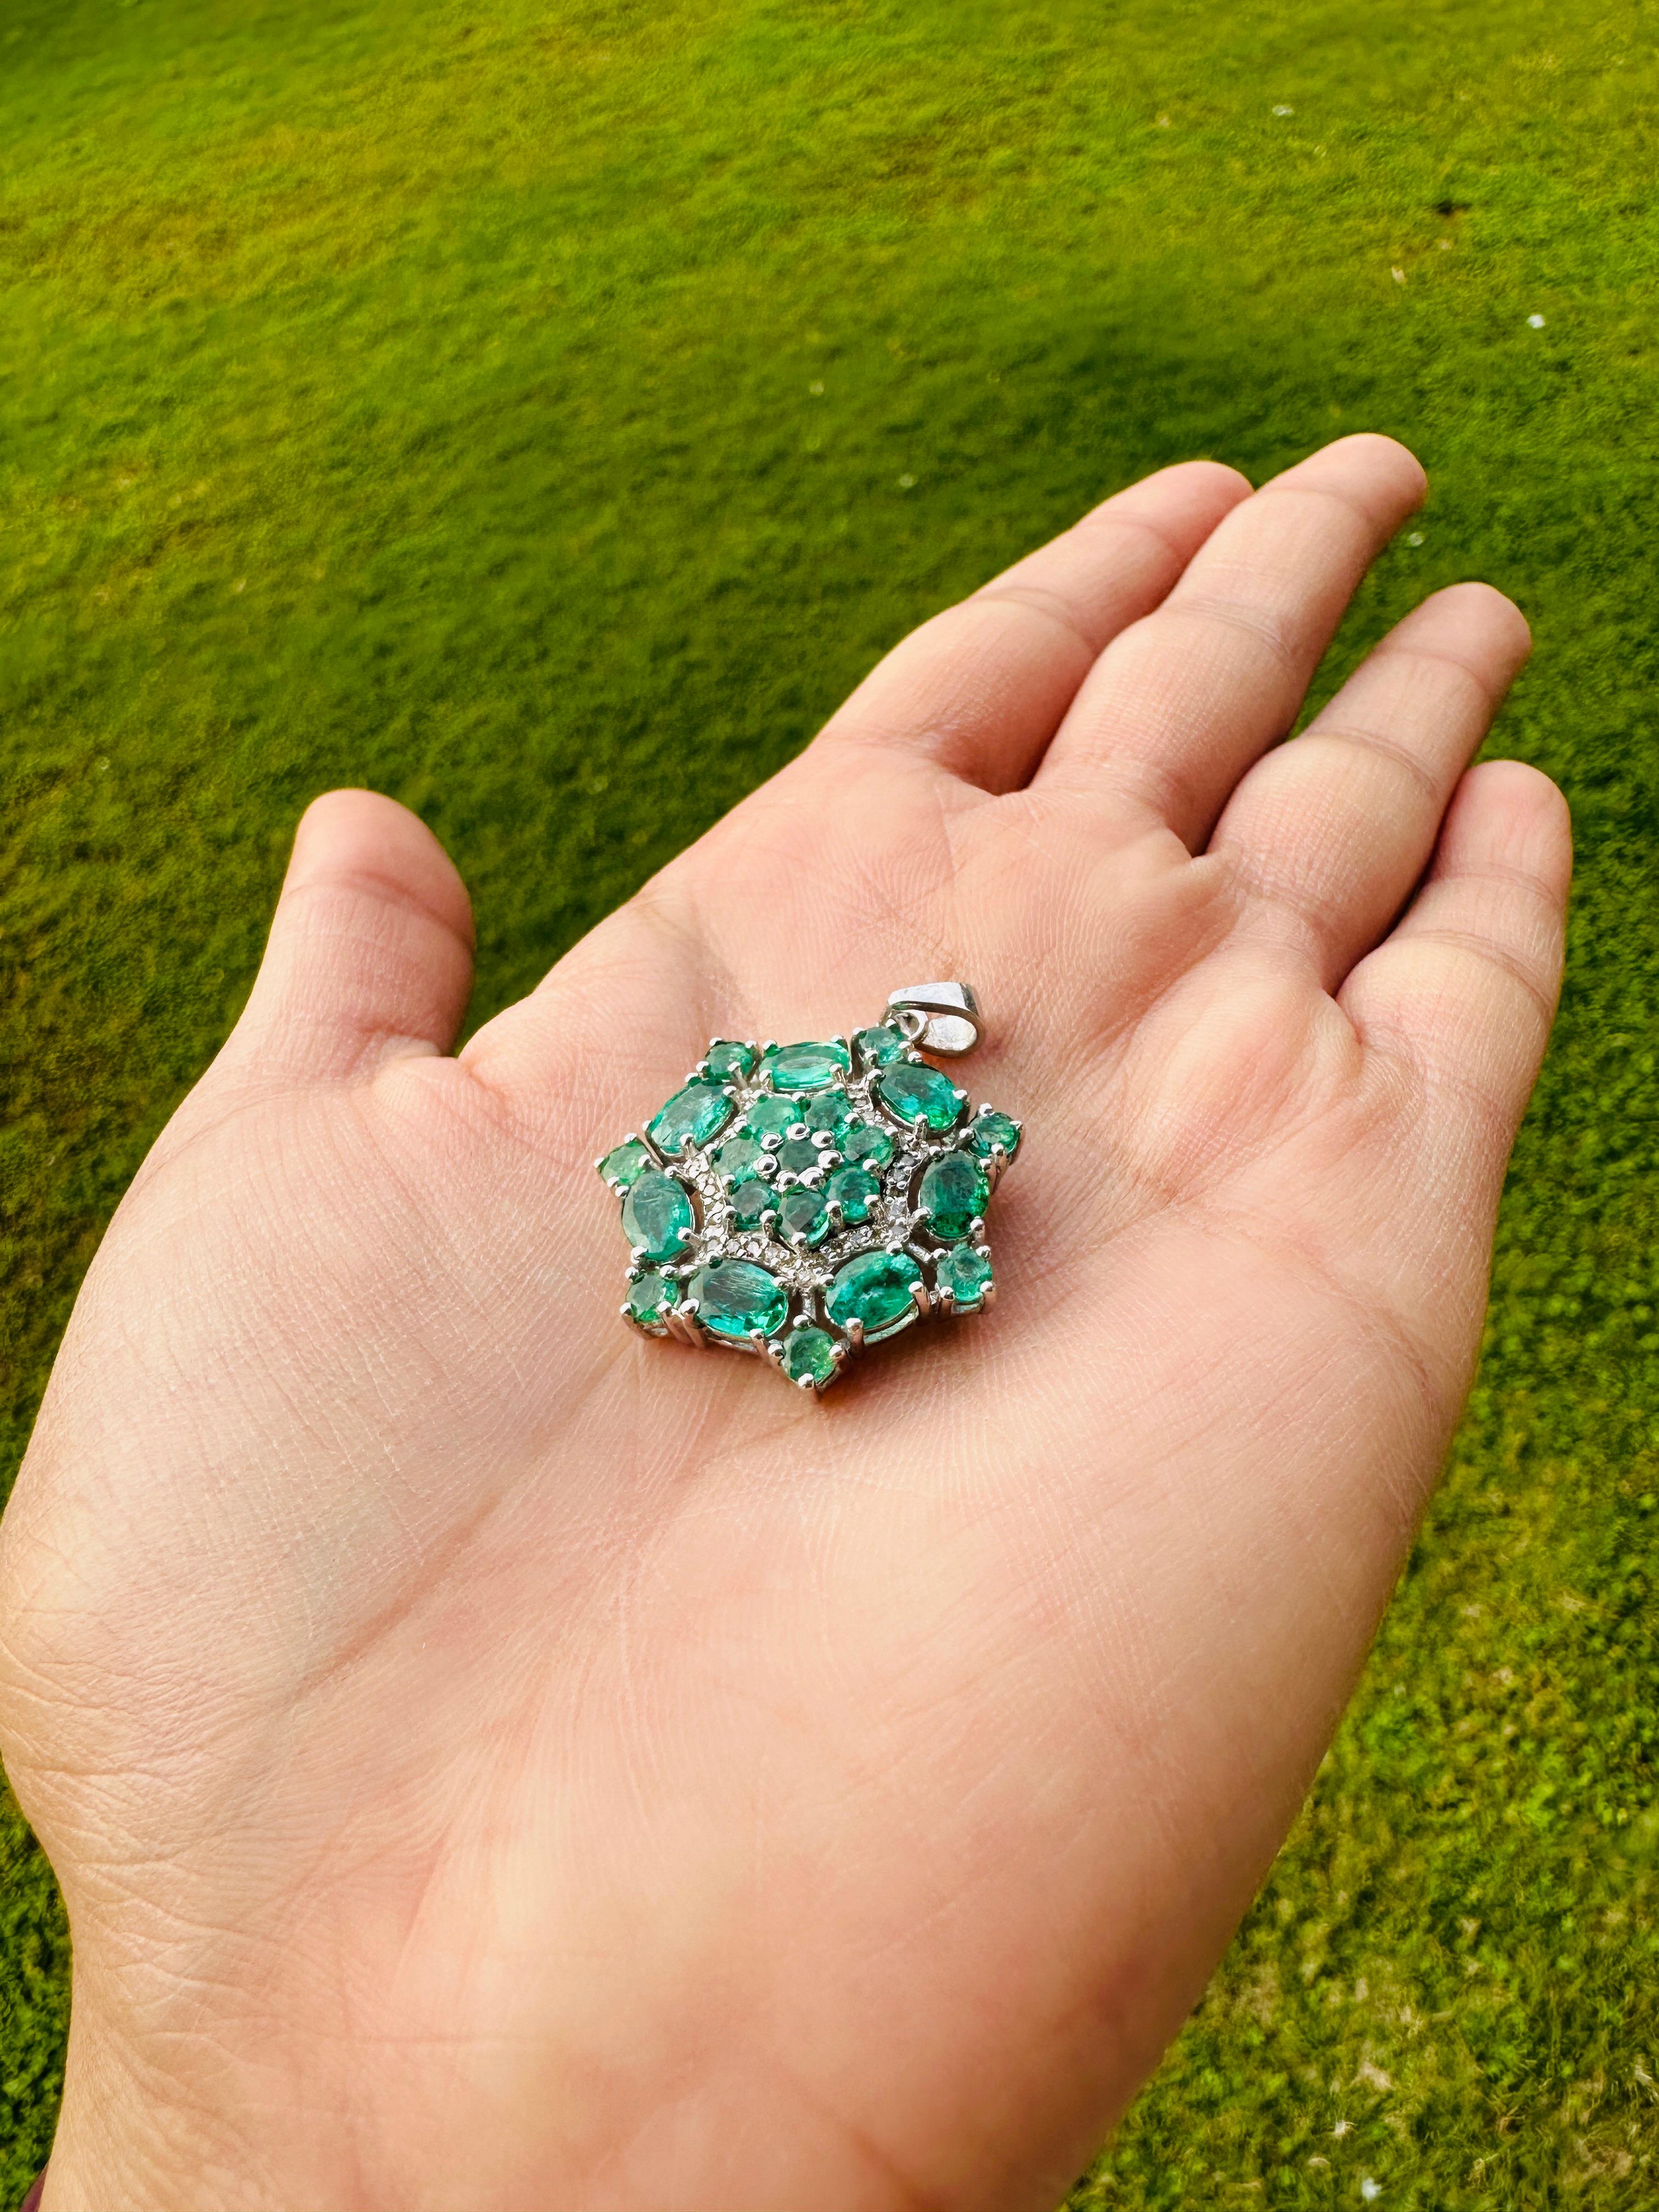 This Real Emerald Birthstone Flower Pendant is meticulously crafted from the finest materials and adorned with stunning emerald which enhances communication skills and boosts mental clarity. 
This delicate to statement pendants, suits every style